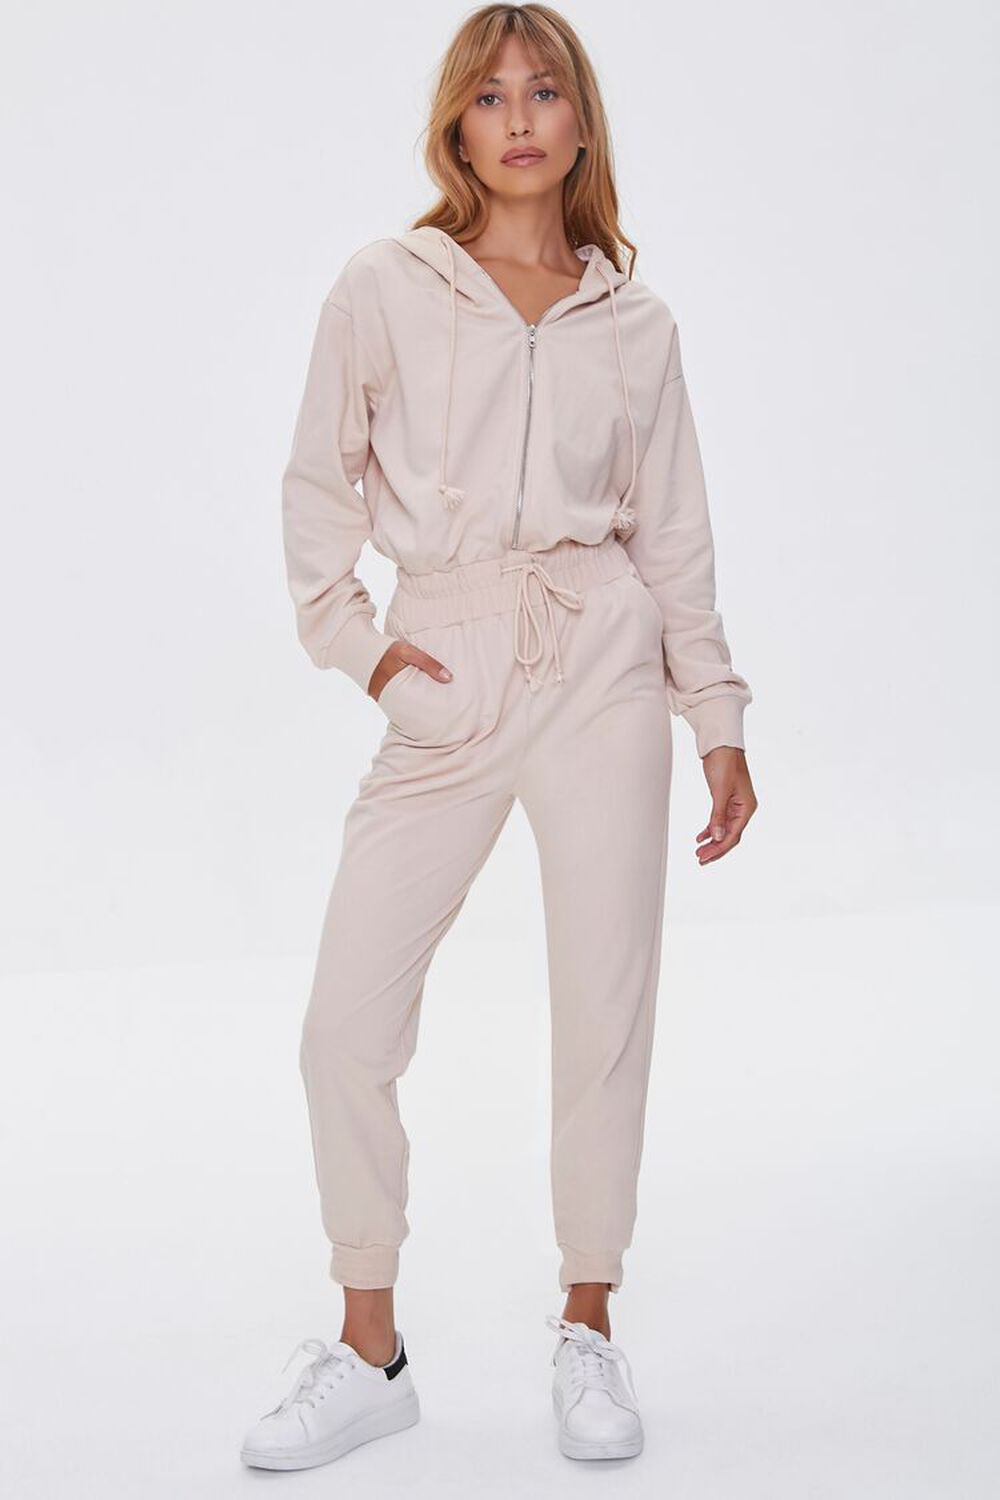 SAND Hooded French Terry Jumpsuit, image 1